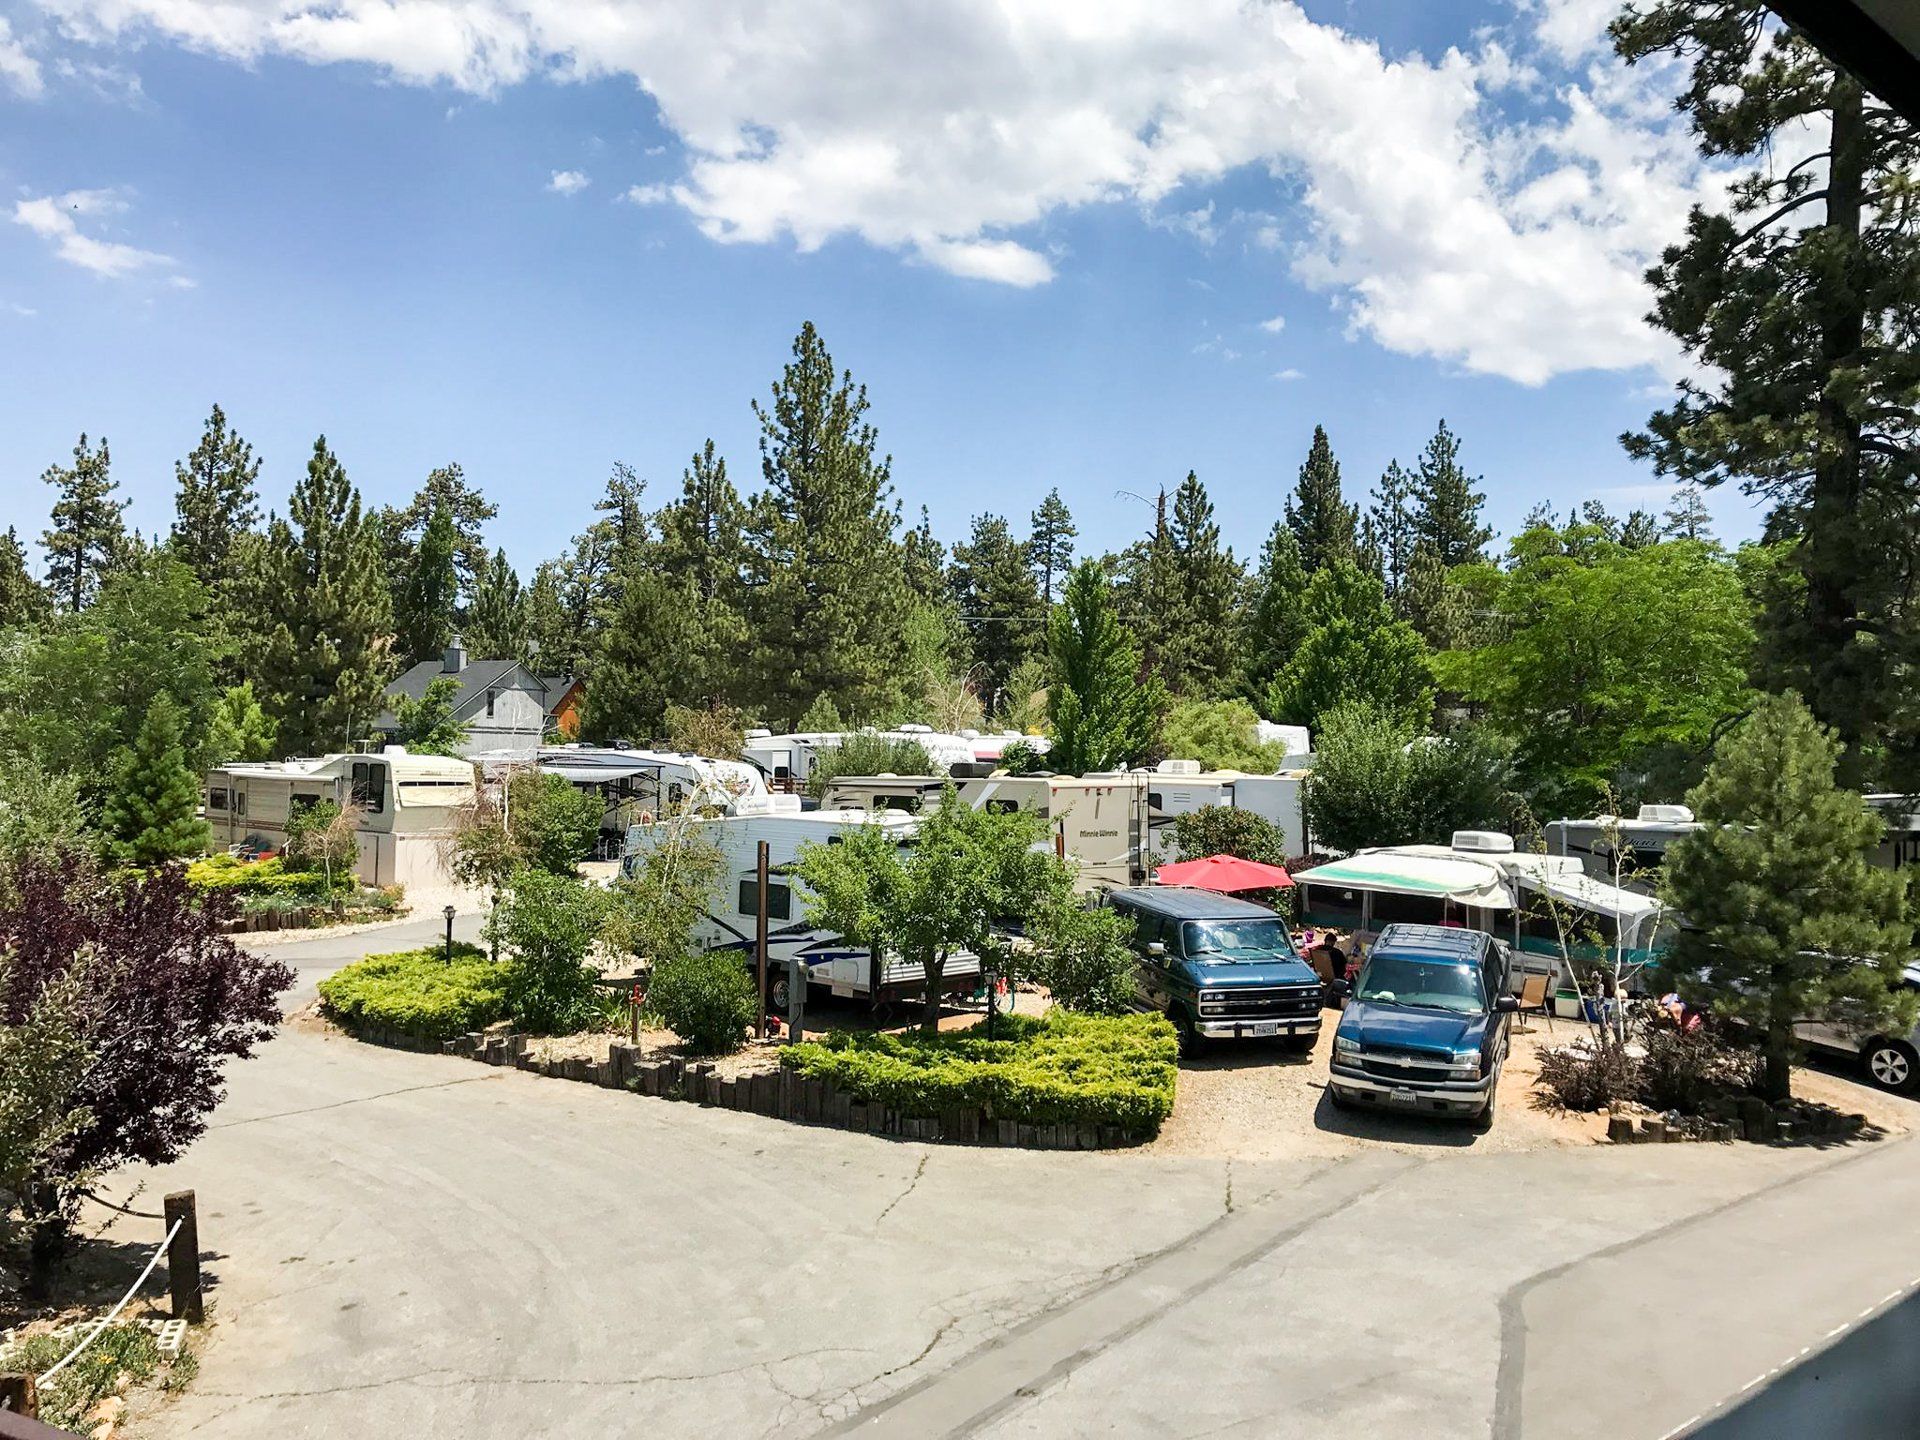 RVs parked amongst trees in RV park in Big Bear